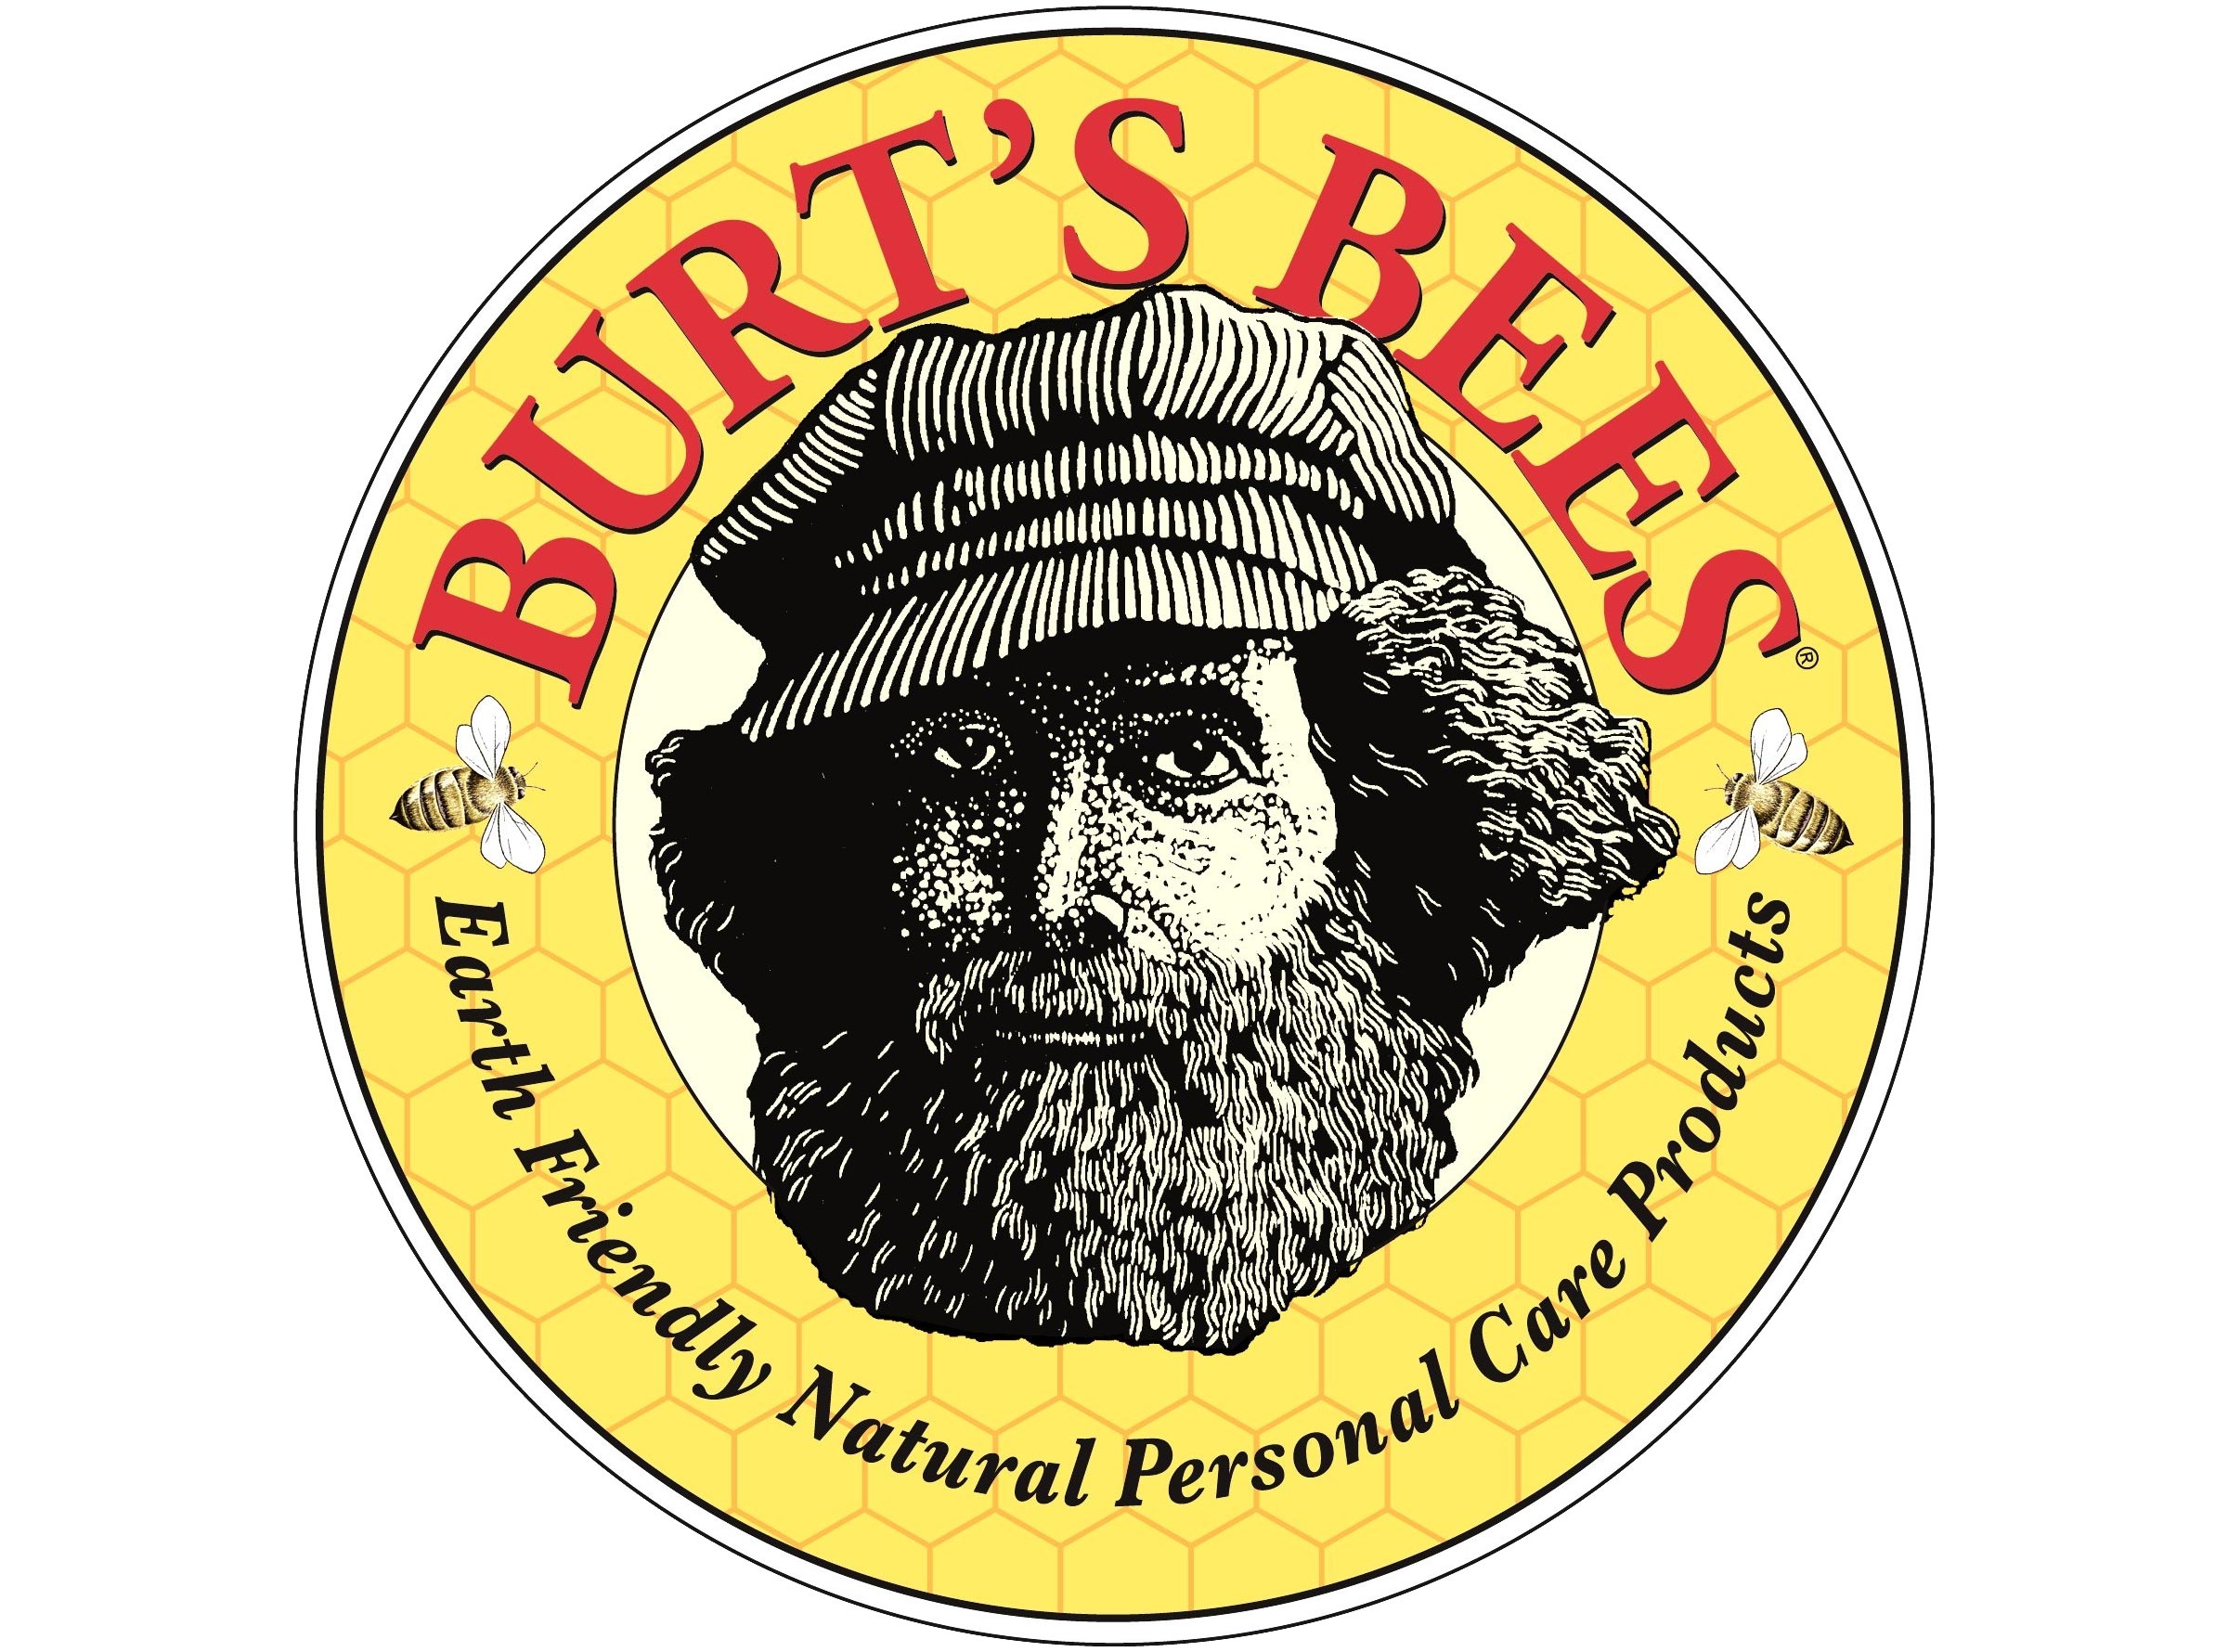 Scientific Test Results of Burt's Bees Natural Lip and Anti-aging